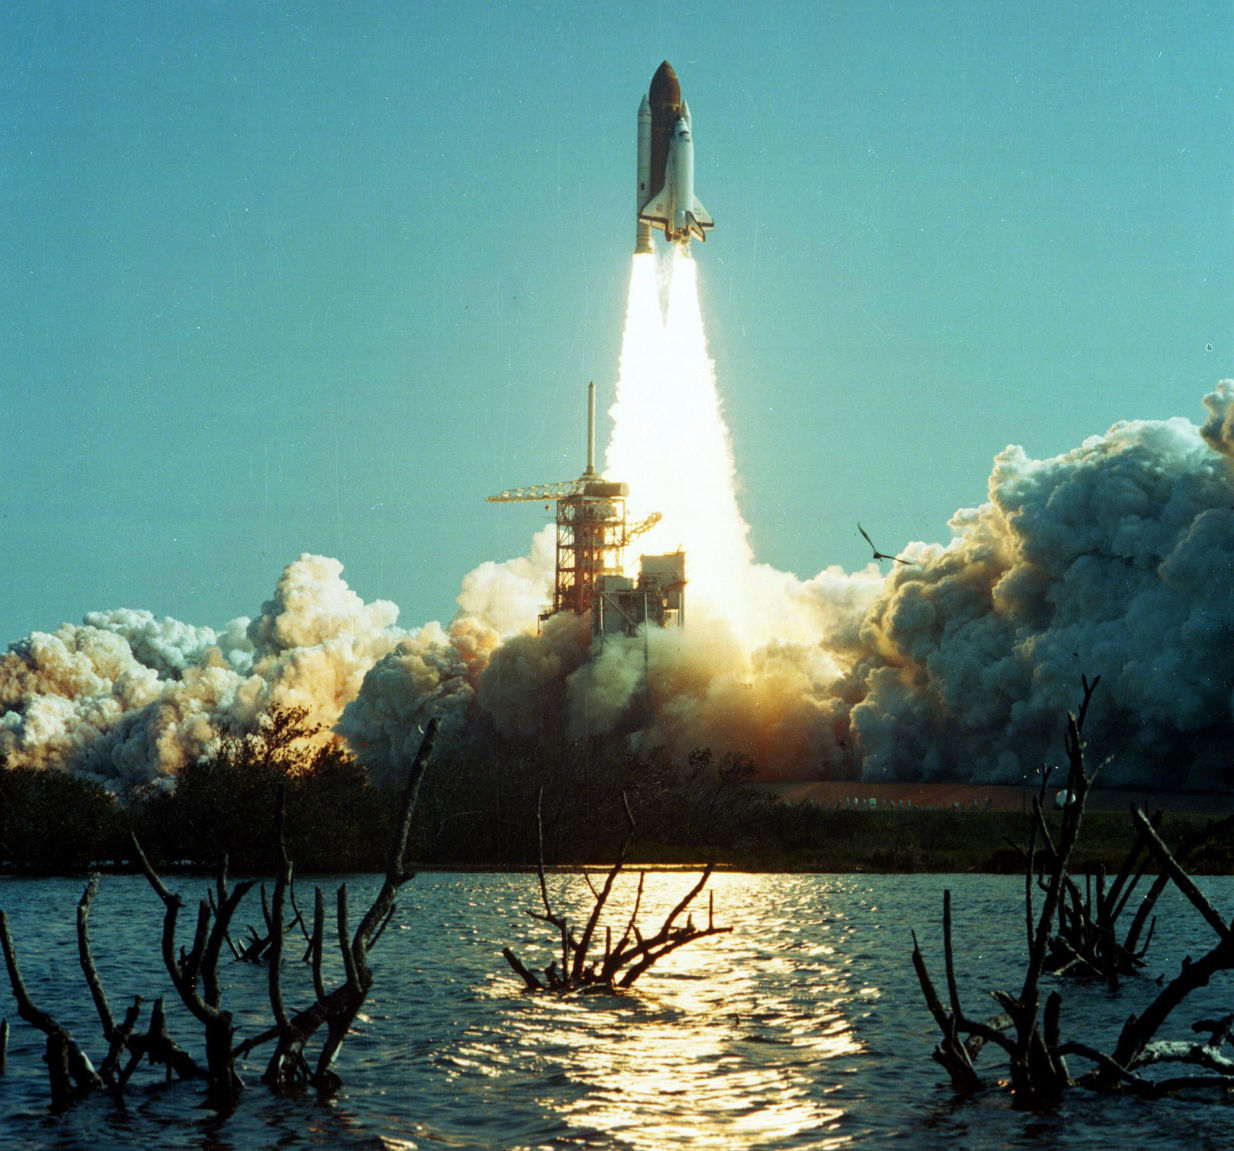 Space Shuttle Challenger taking off from Cape Canaveral.